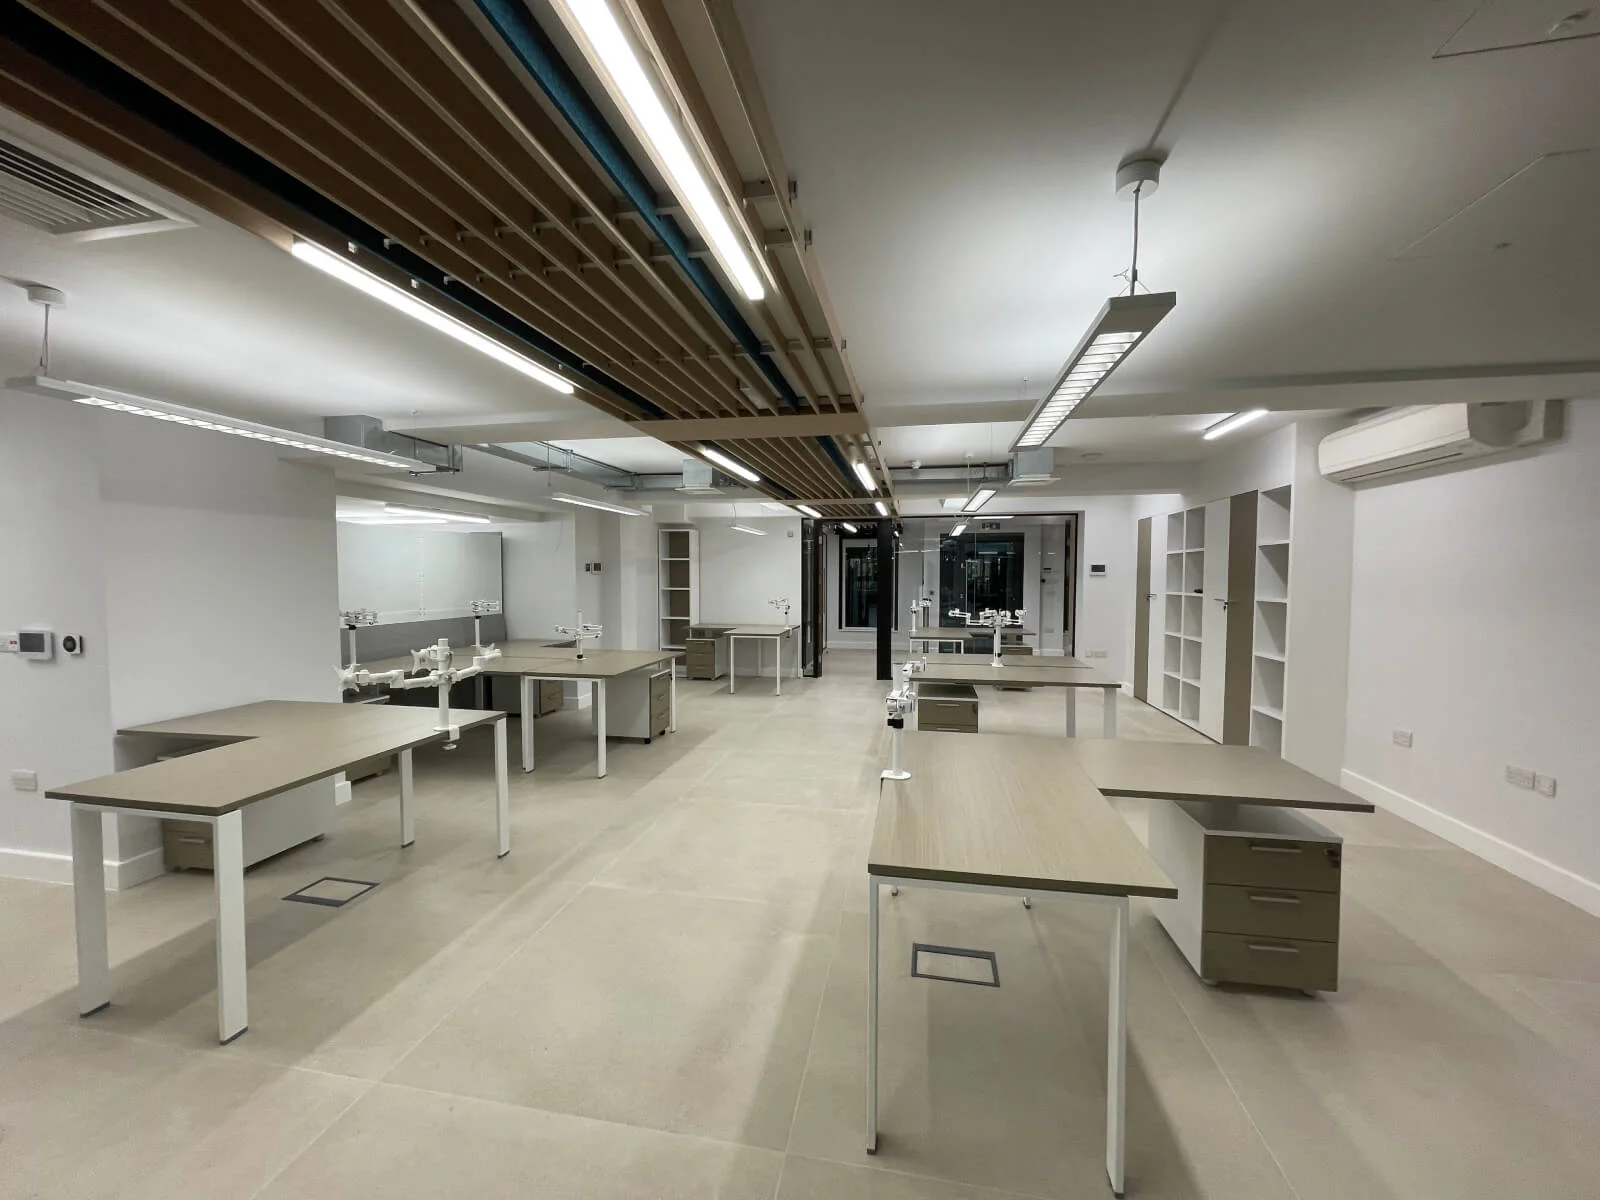 Deekay Group office space with deisgner furniture, walls and glass partitions 5